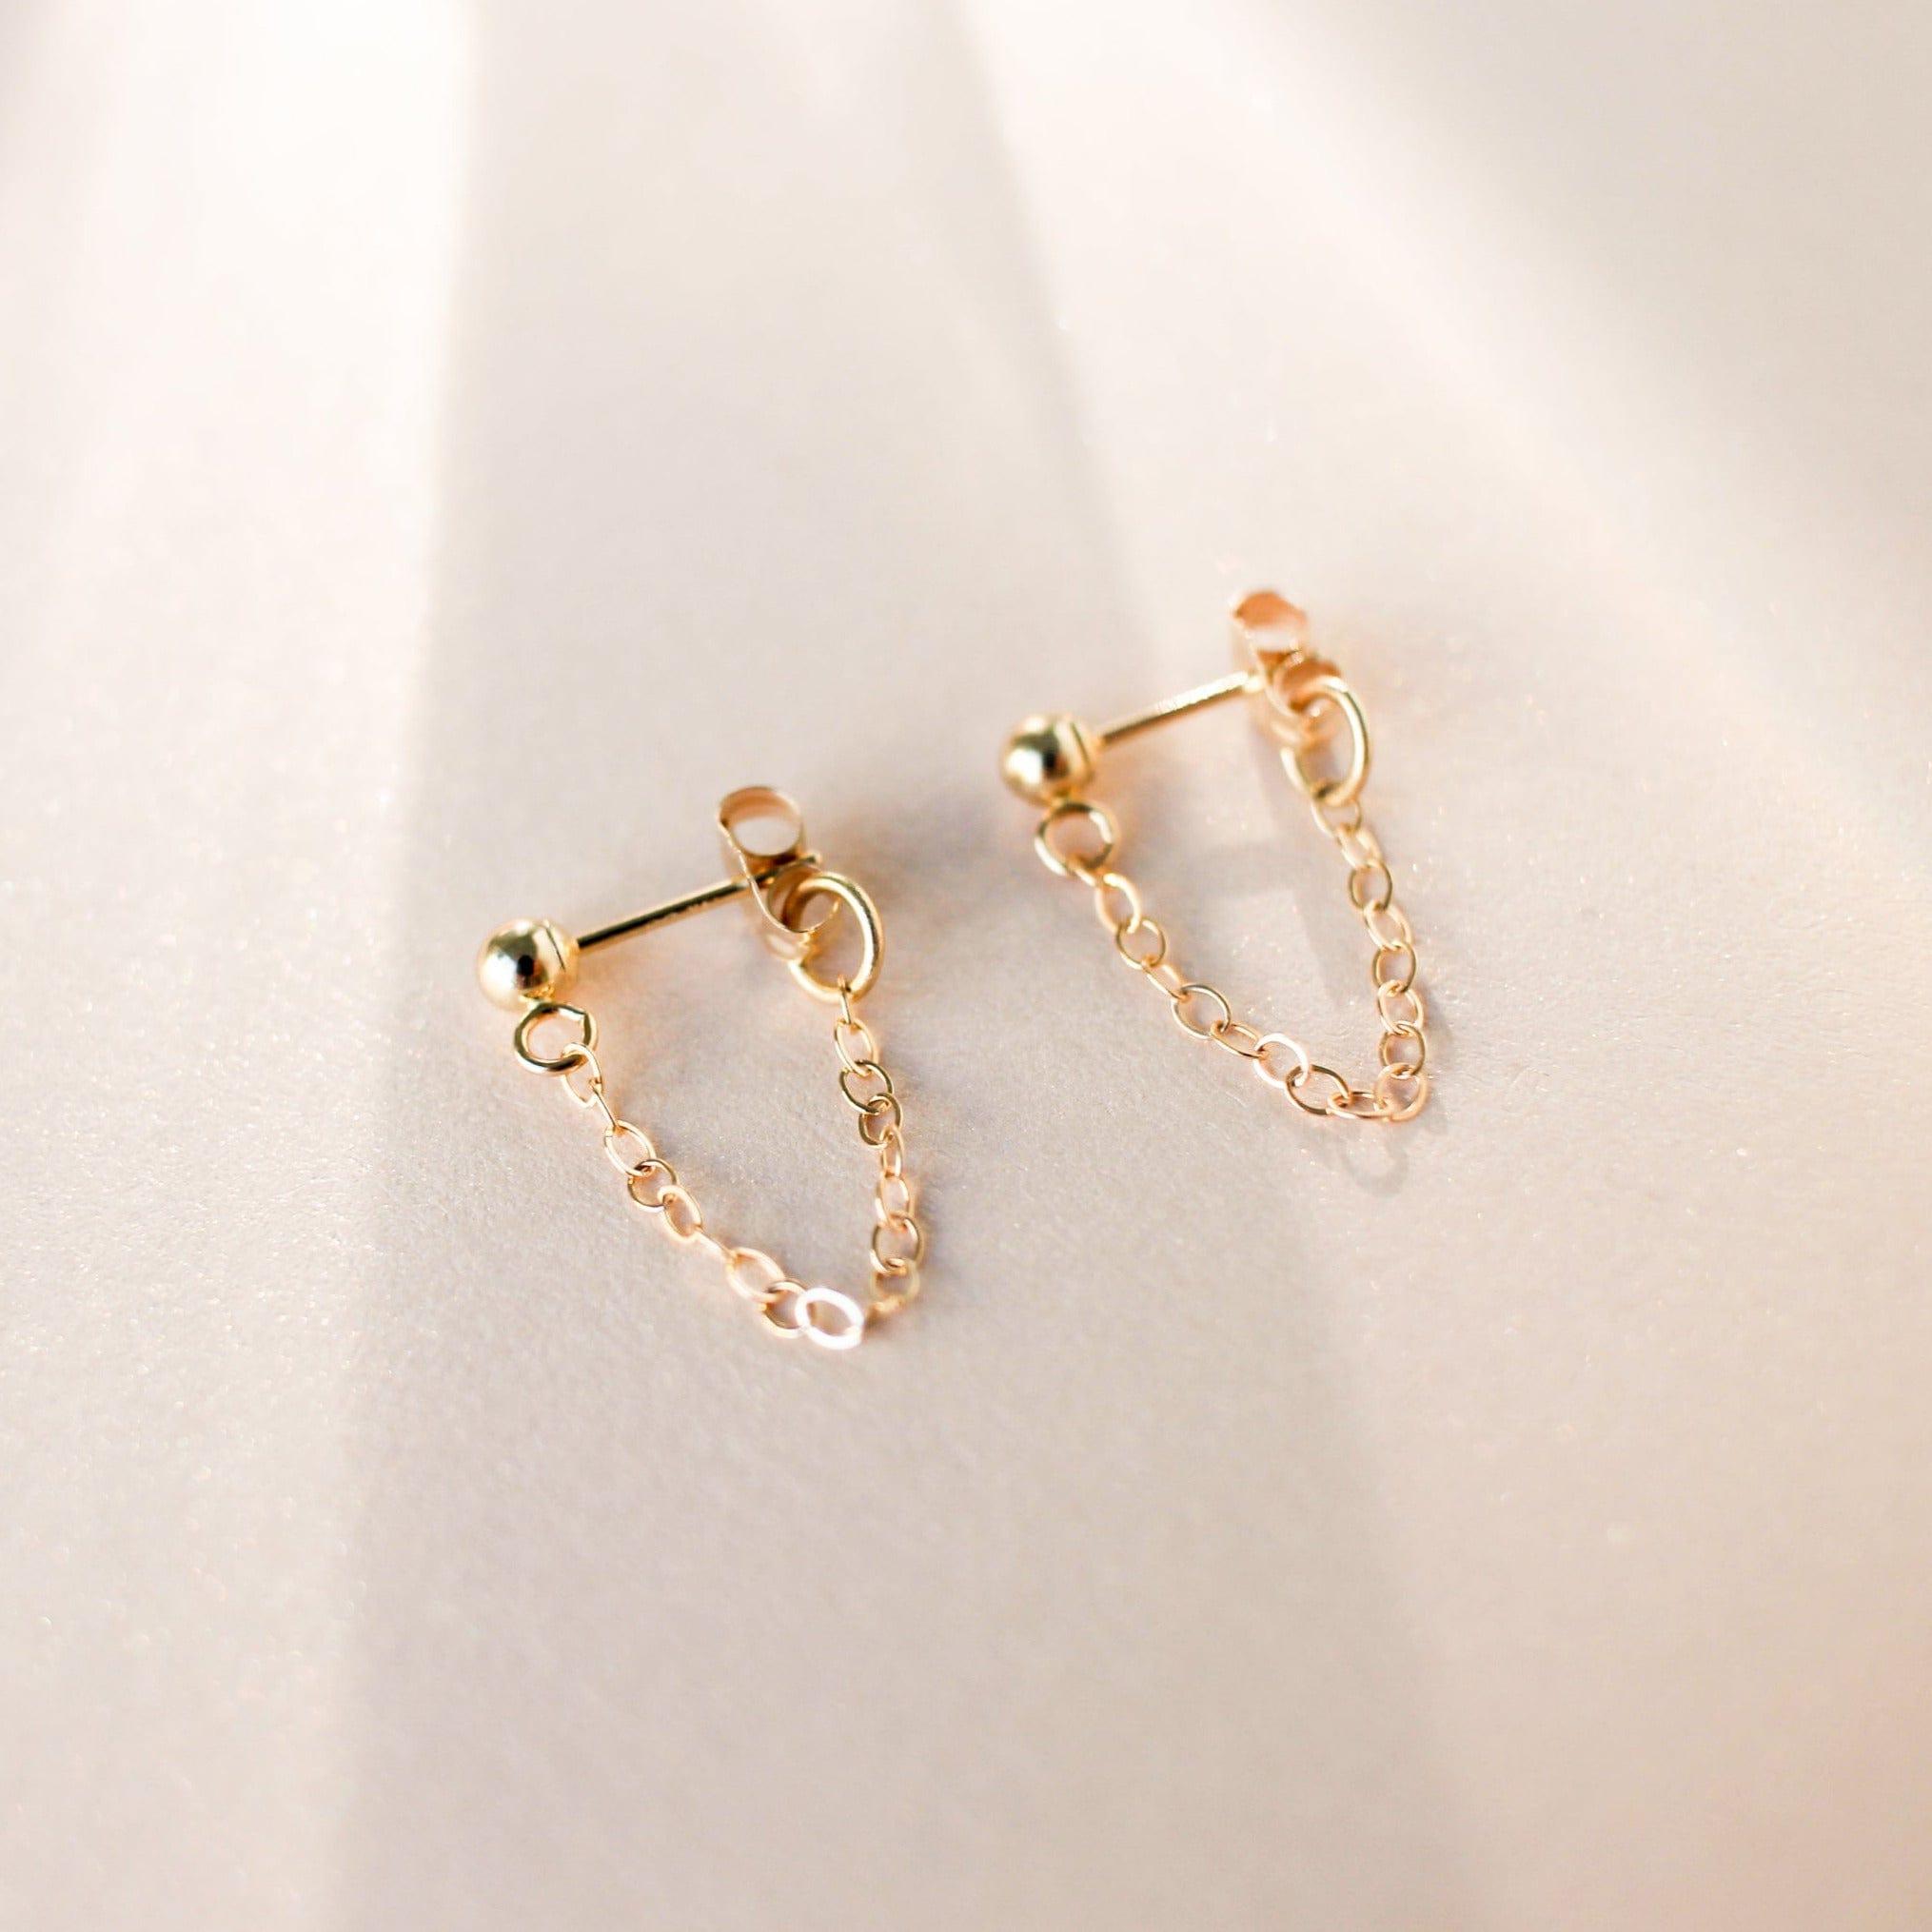 Chain Loop Earrings - Nolia Jewelry - Meaningful + Sustainably Handcrafted Jewelry